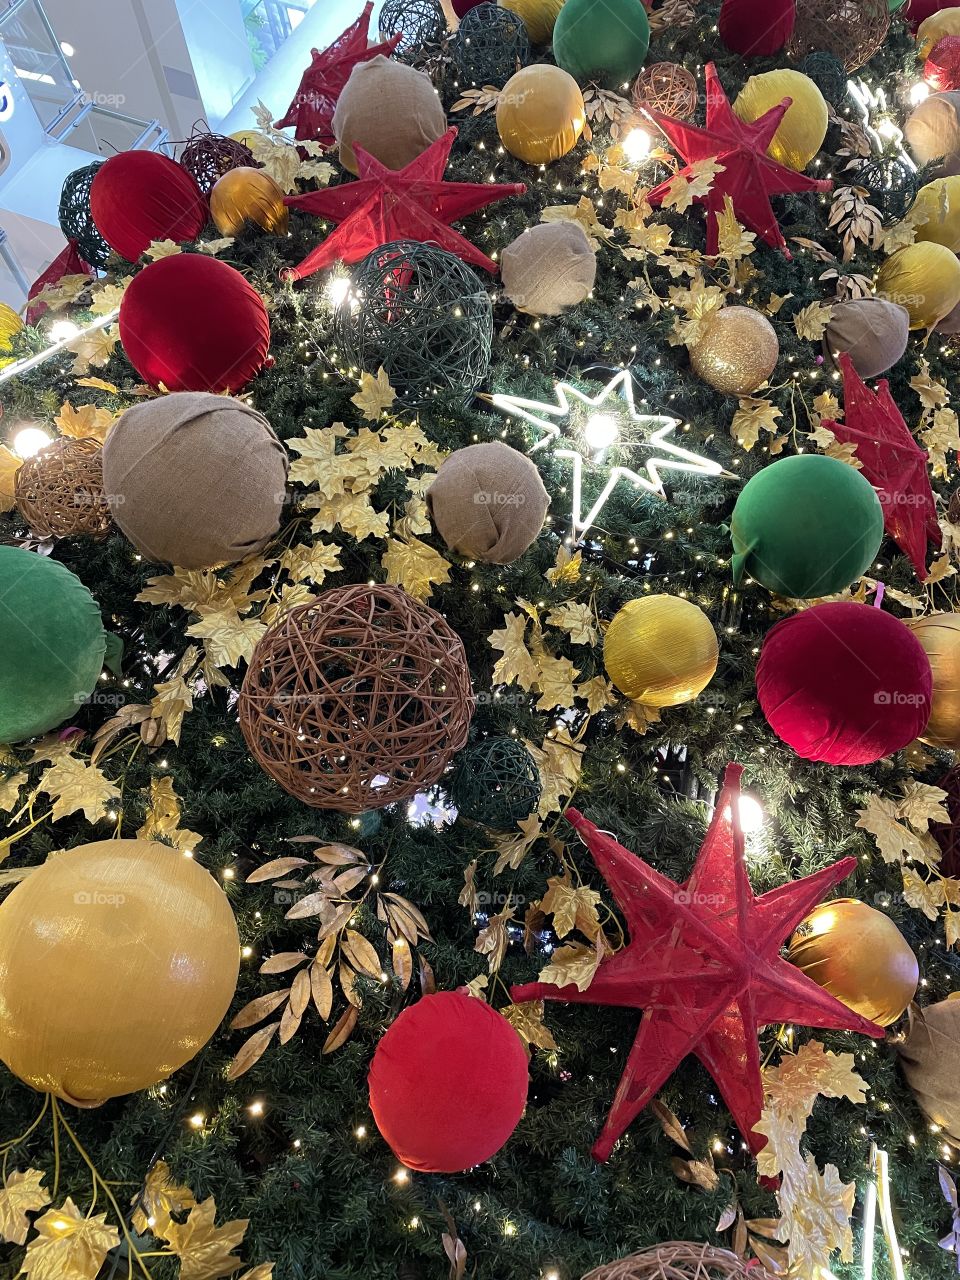 Christmas balls of various colors, materials and sizes adorned a Christmas tree